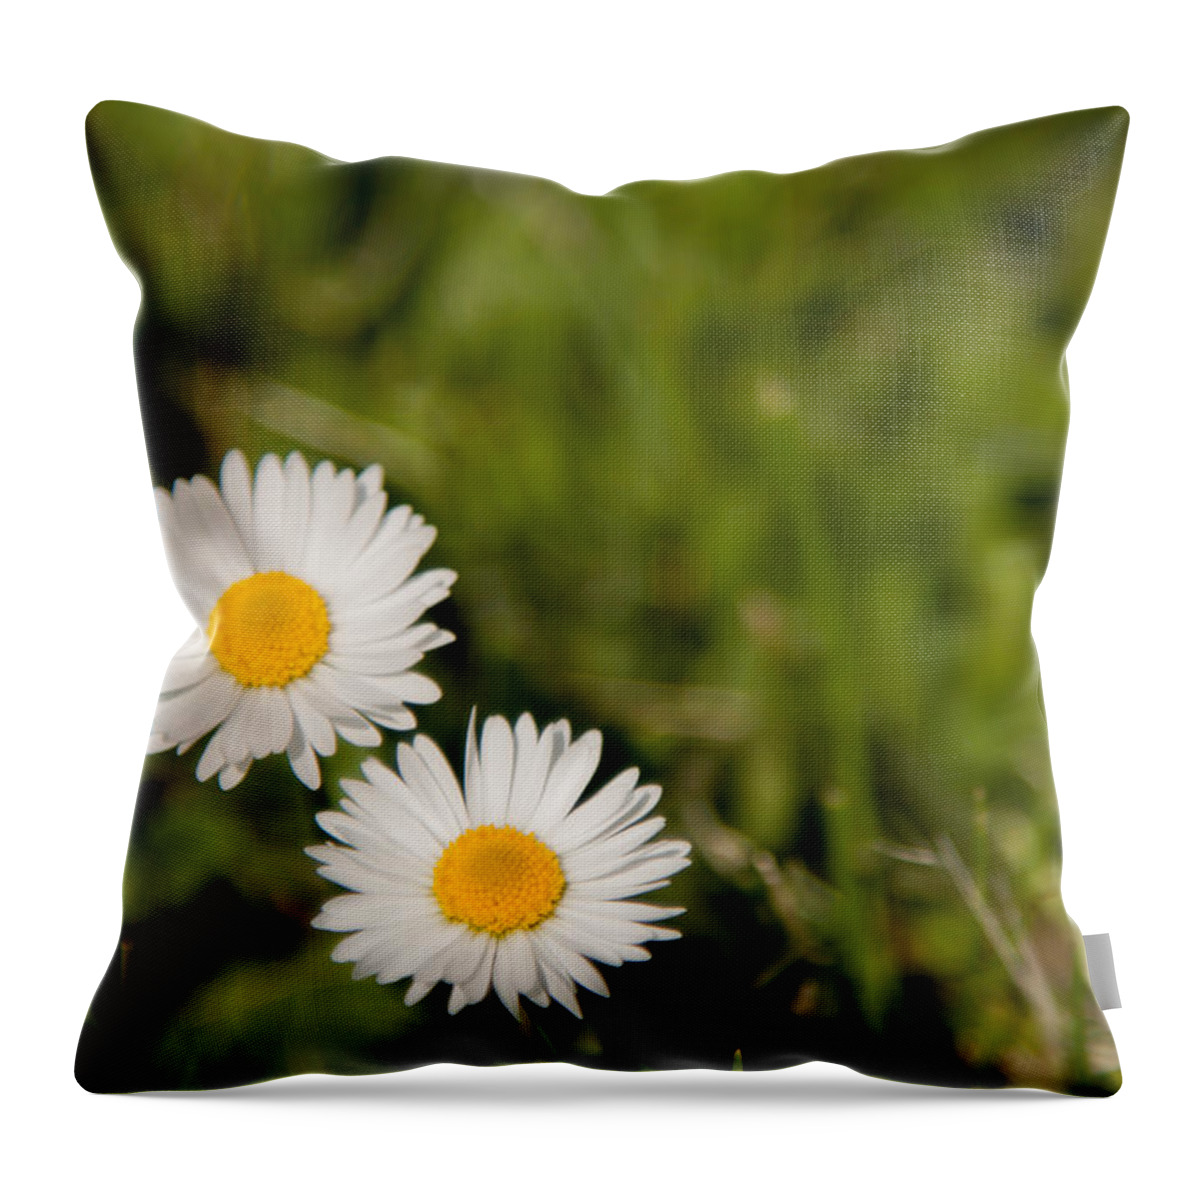 Daisy Throw Pillow featuring the photograph He Loves Me He Loves Me Not by Courtney Webster